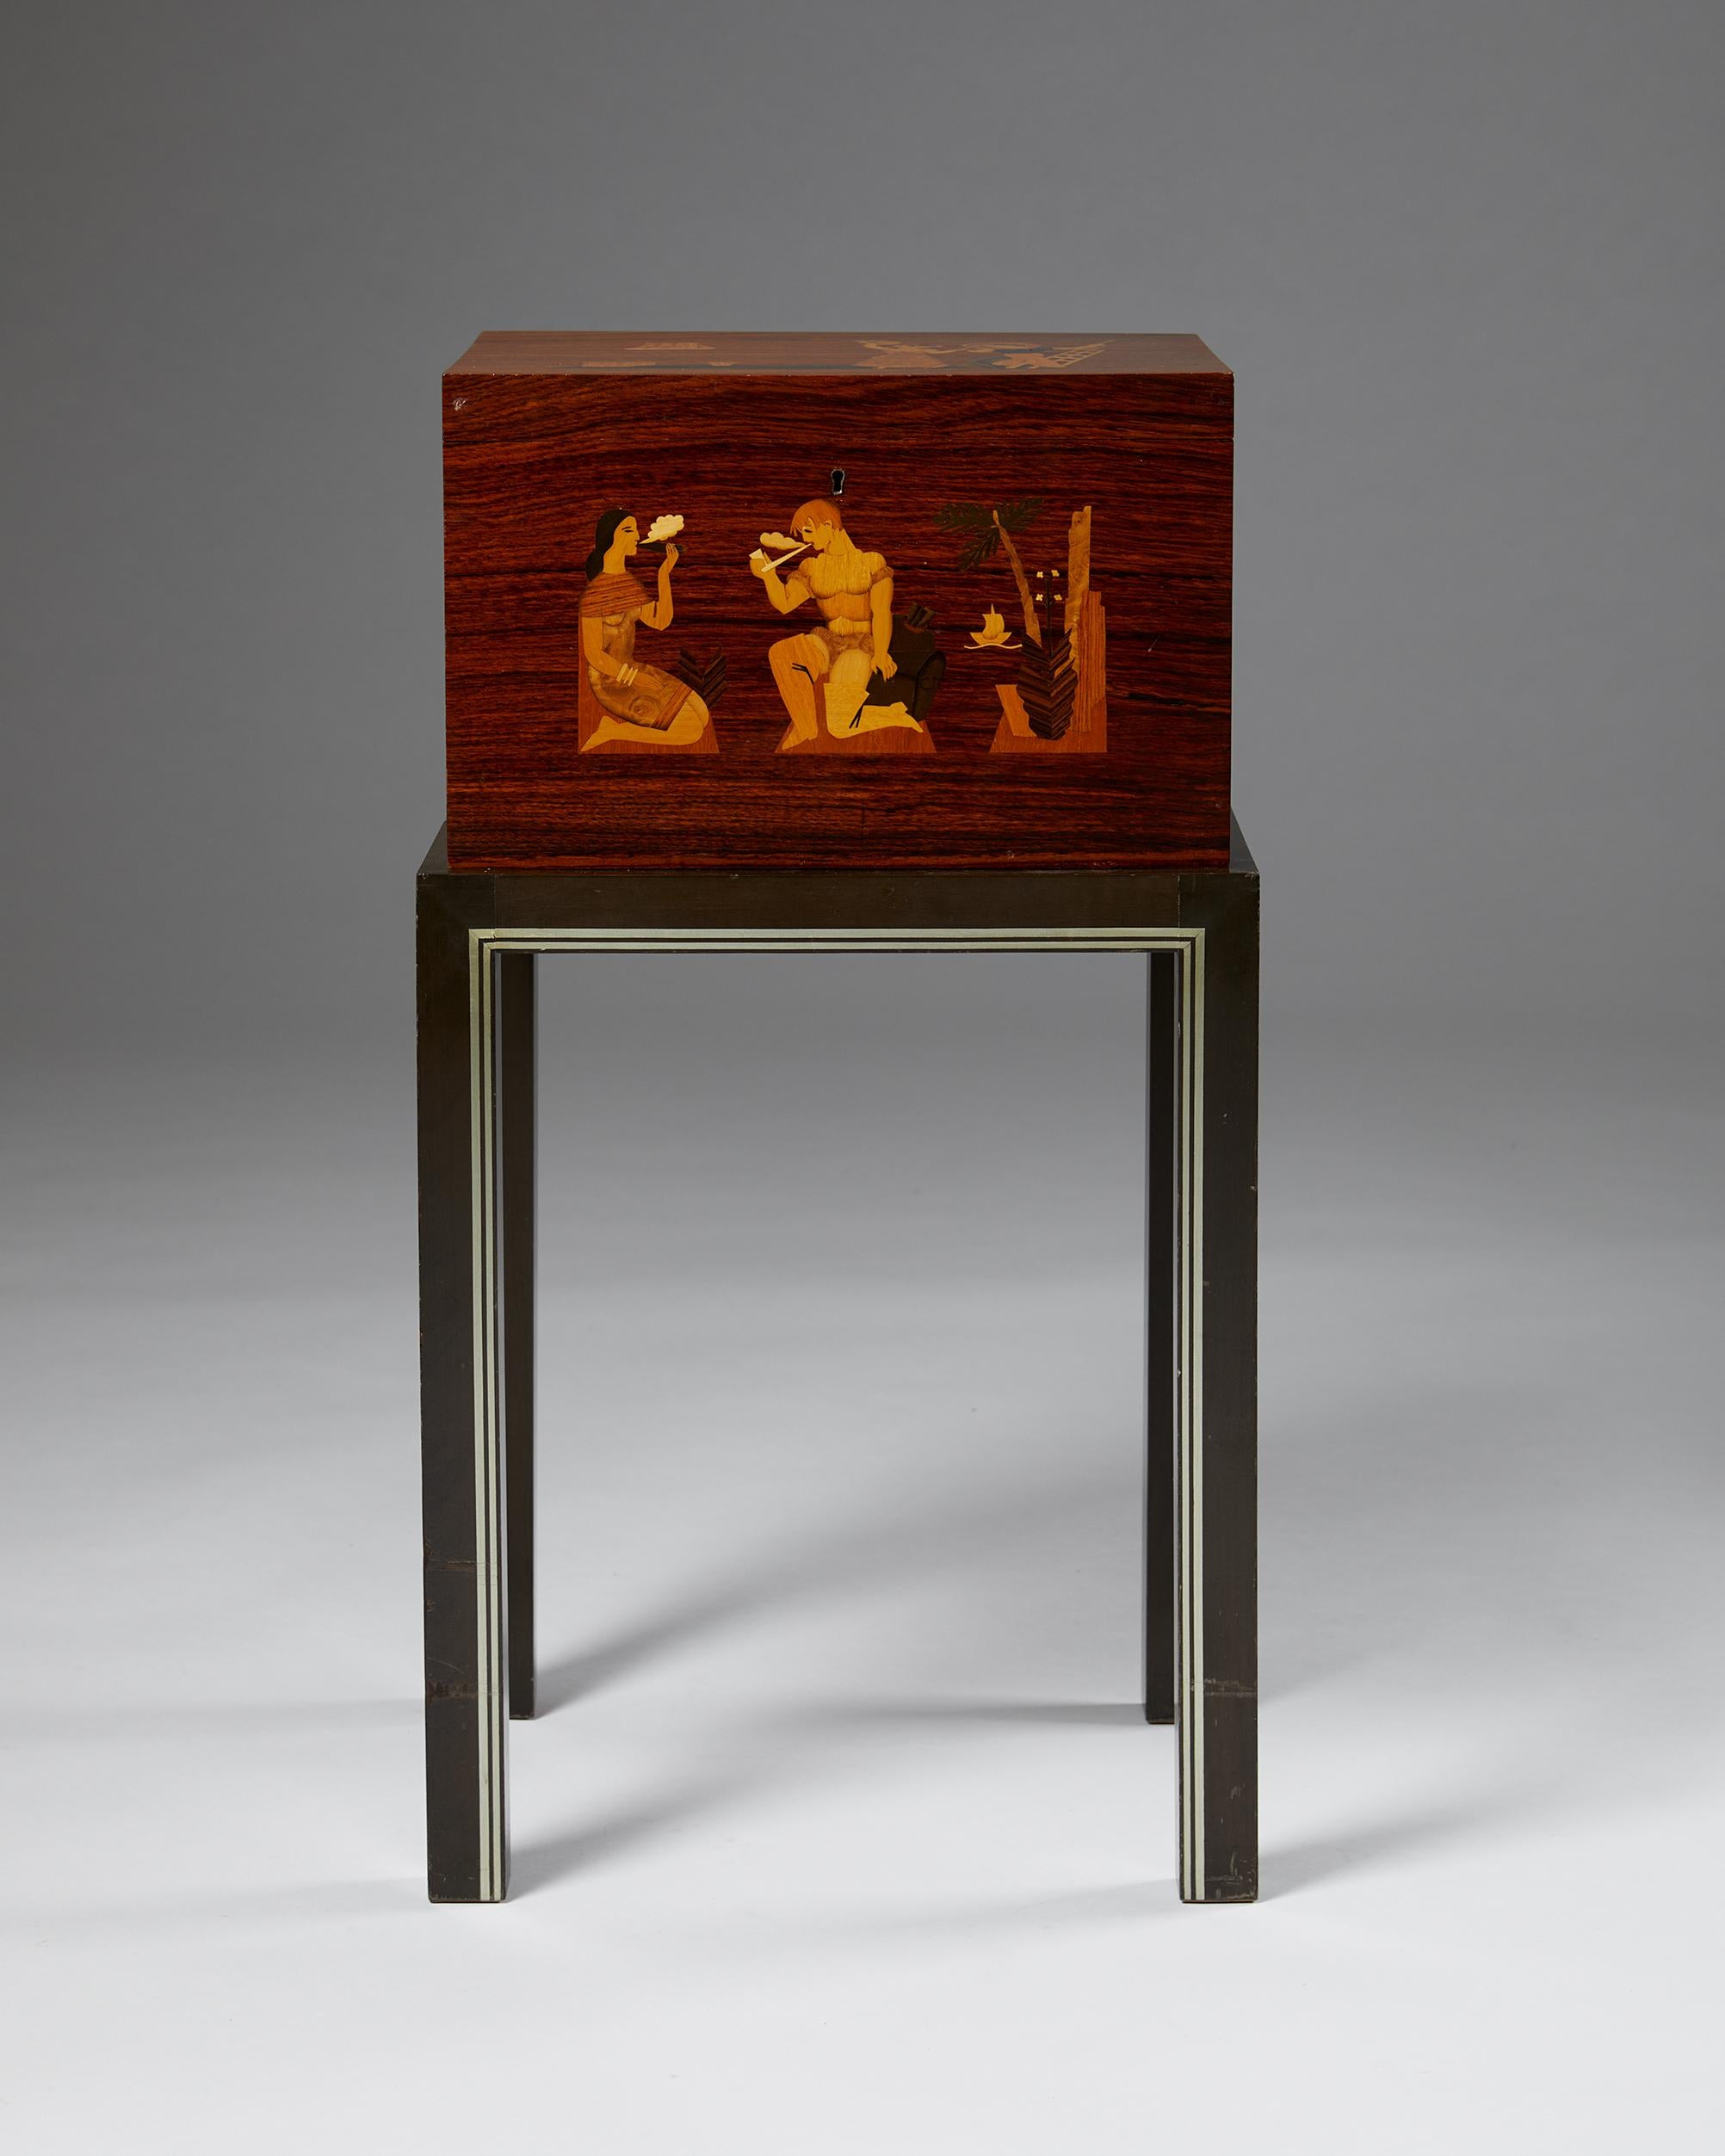 Mid-Century Modern Sewing Box Designed by Birger Ekman for Mjölby Intarsia, Sweden, 1939